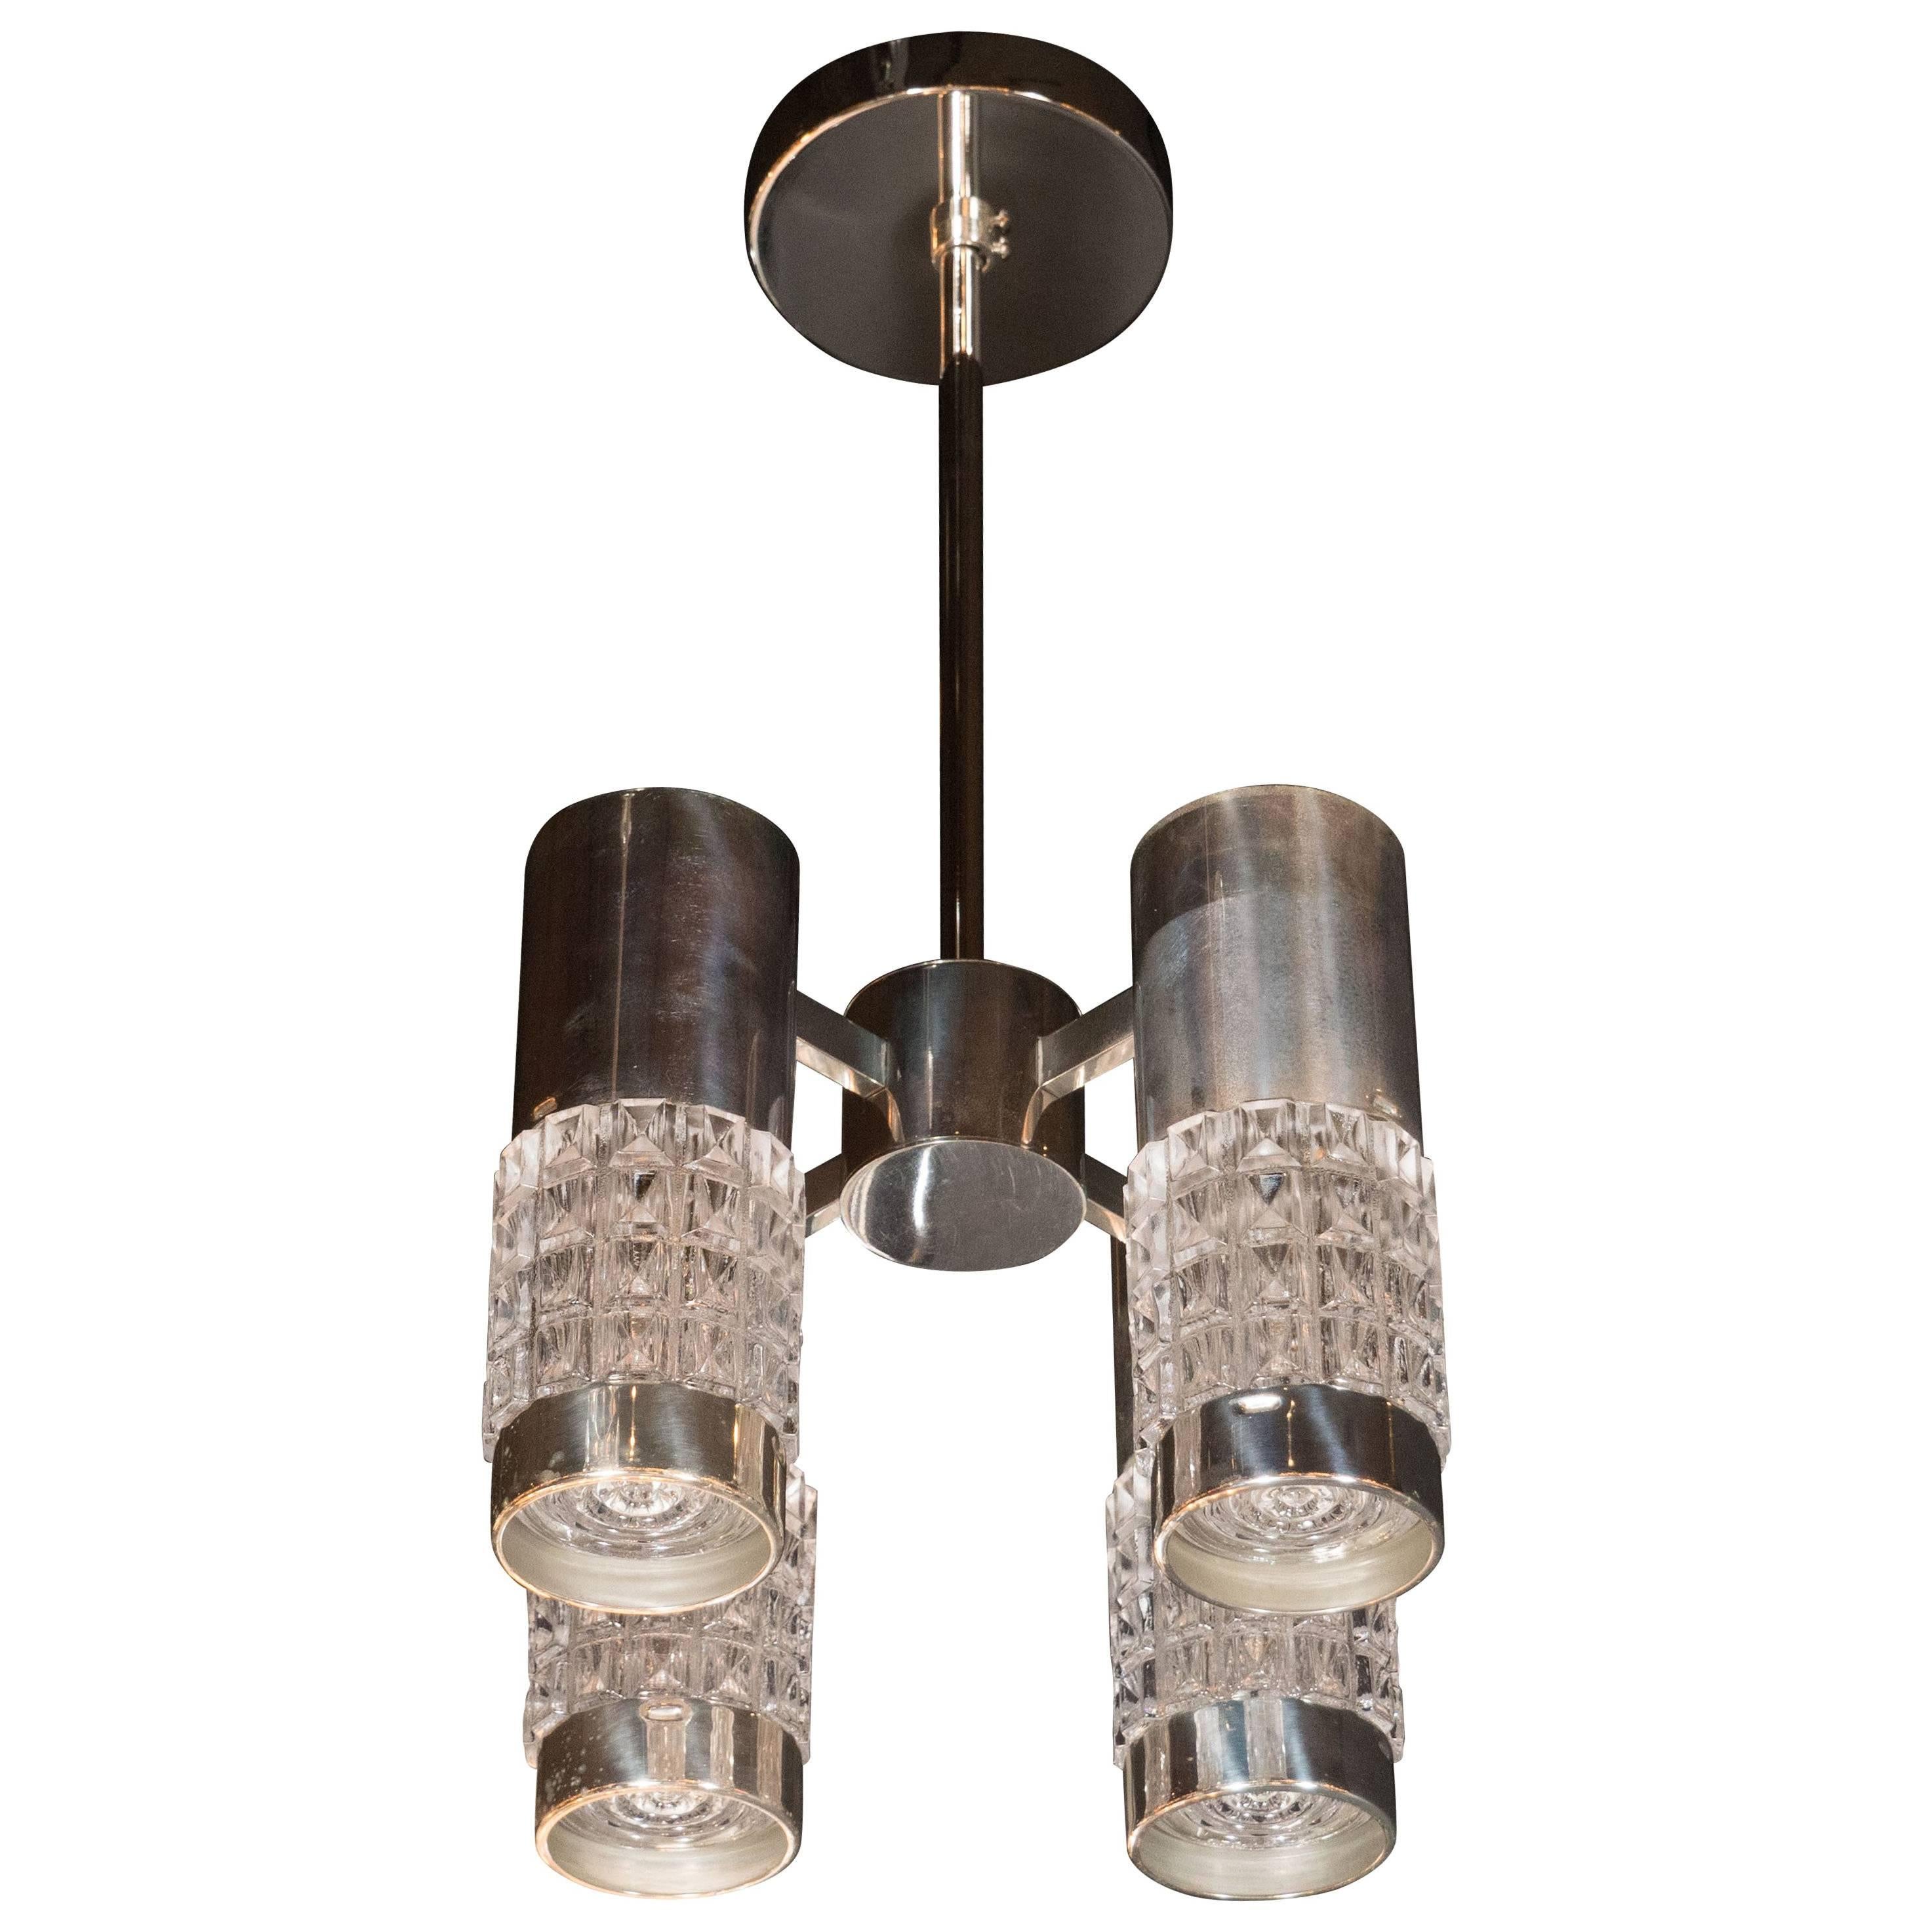 Mid-Century Modern Polished Chrome Four-Arm Chandelier For Sale